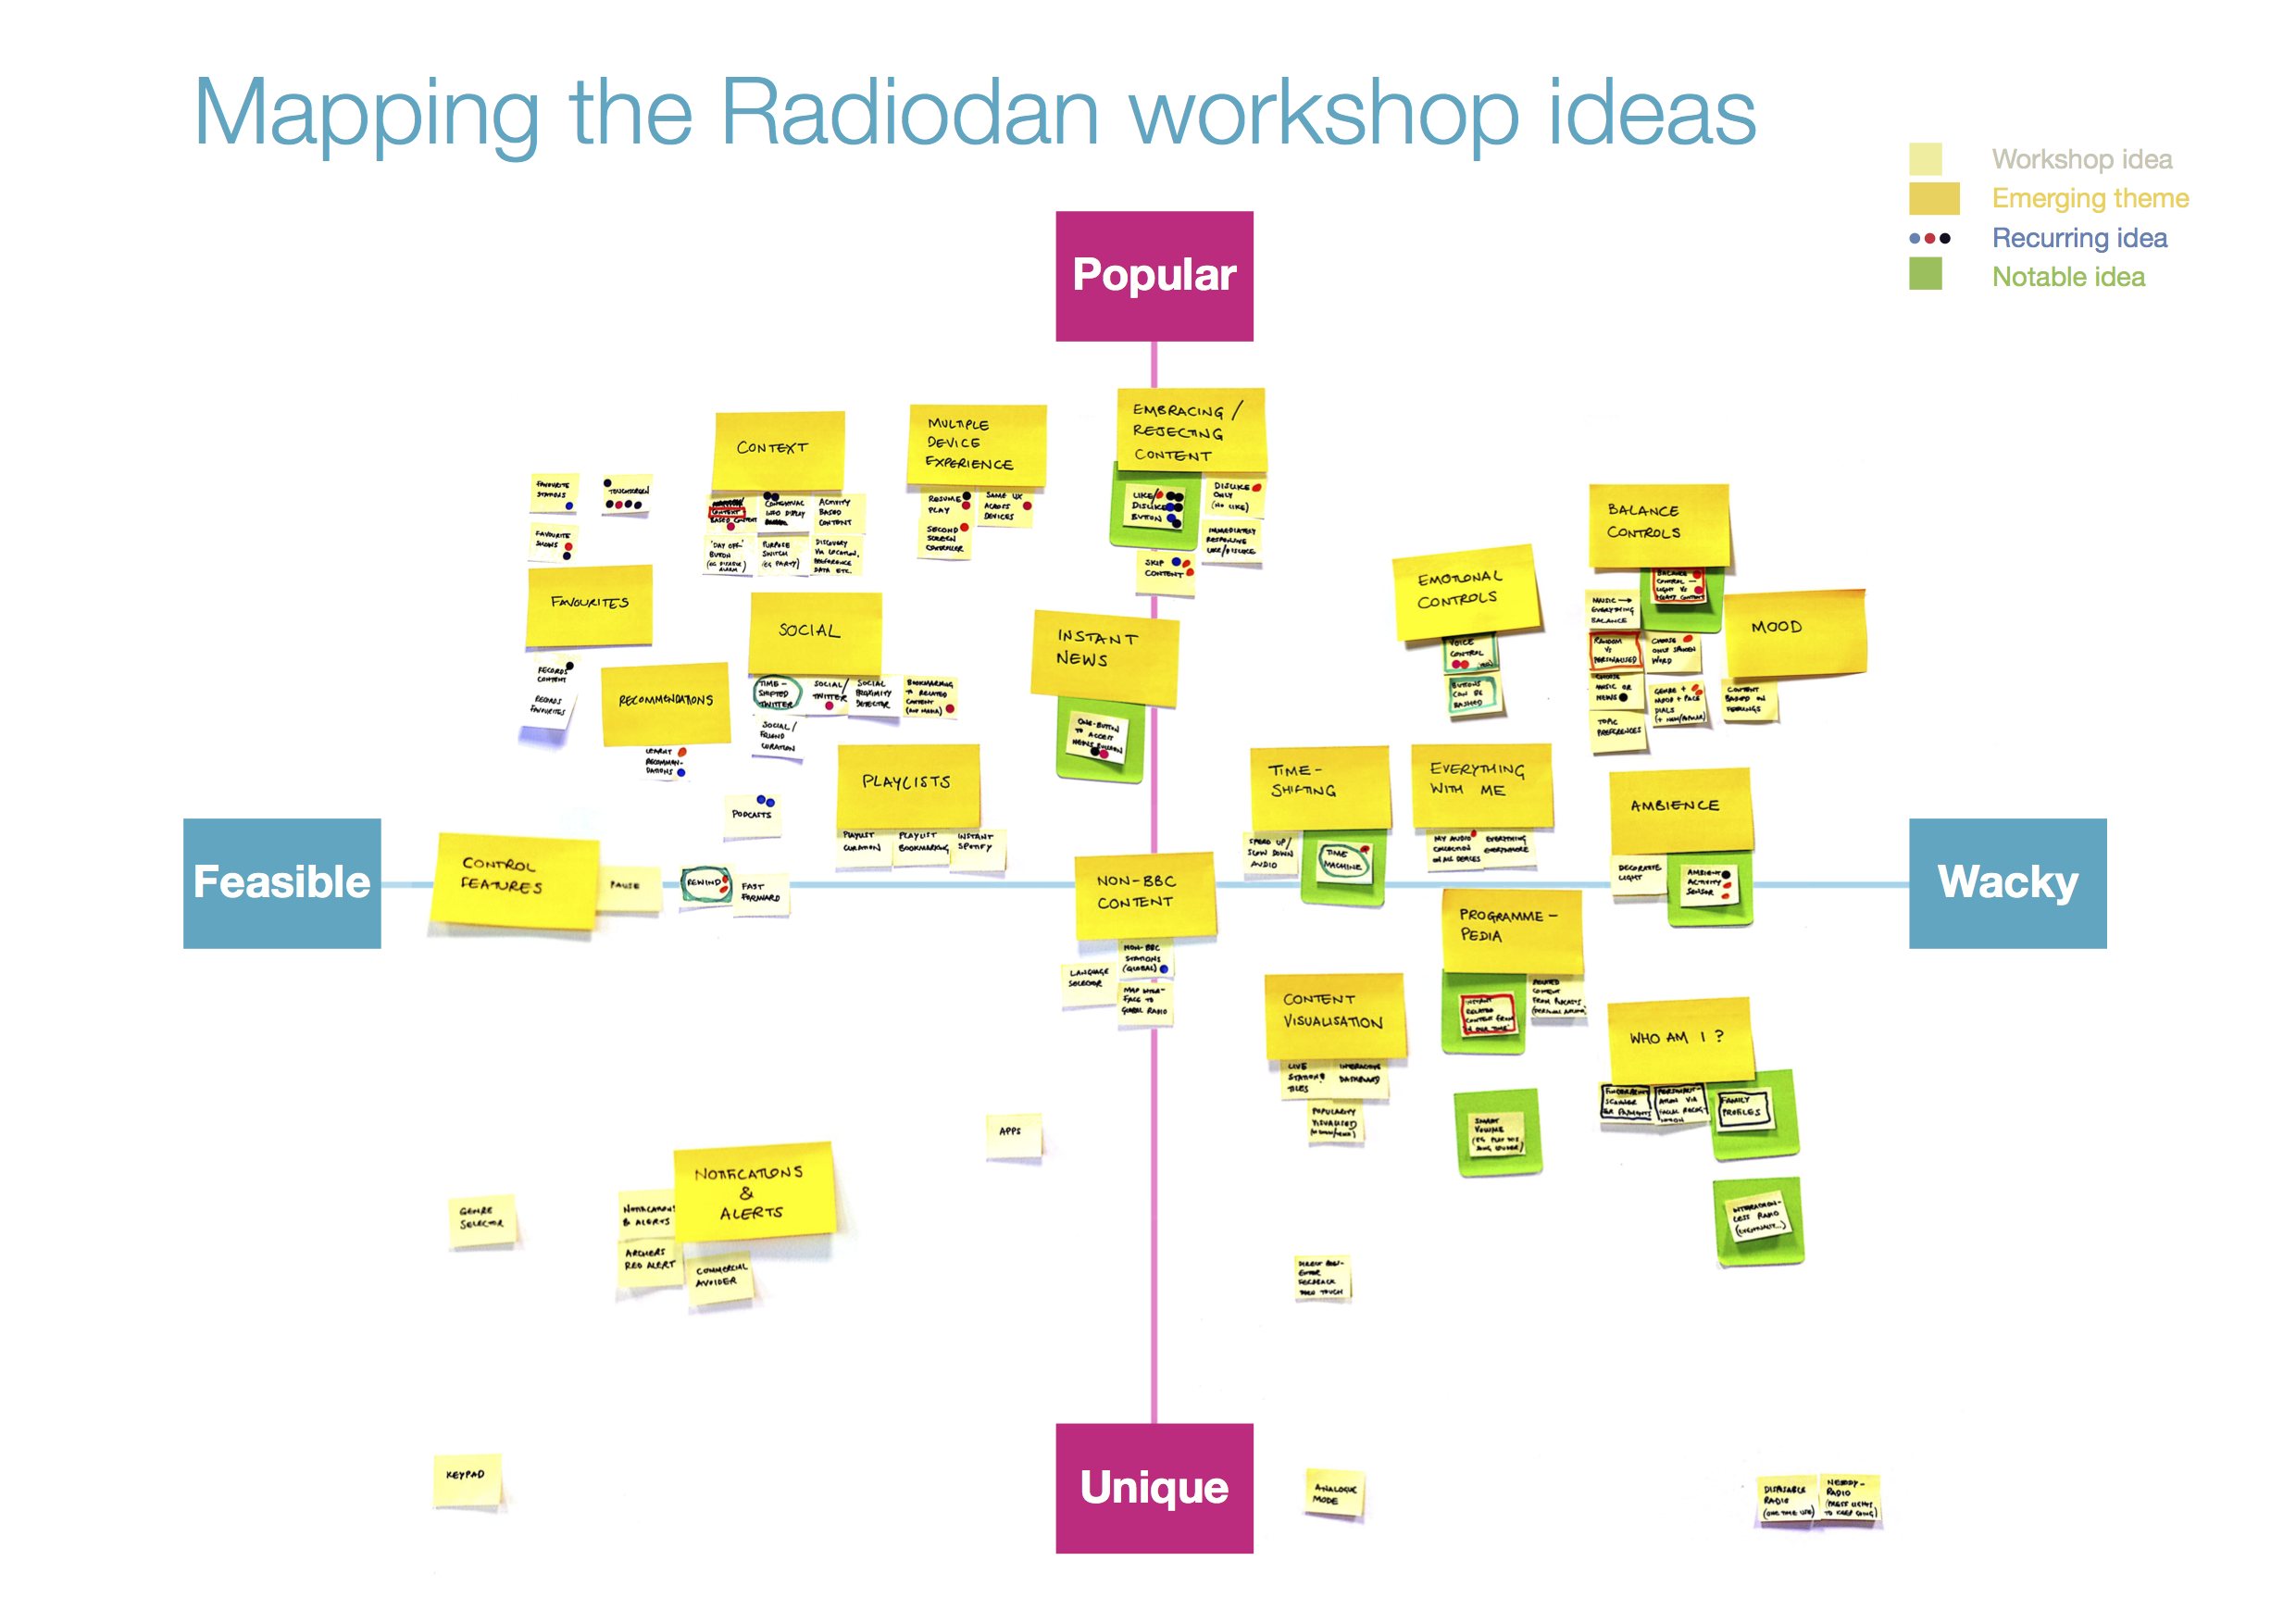 Wrongradio workshop mapping results